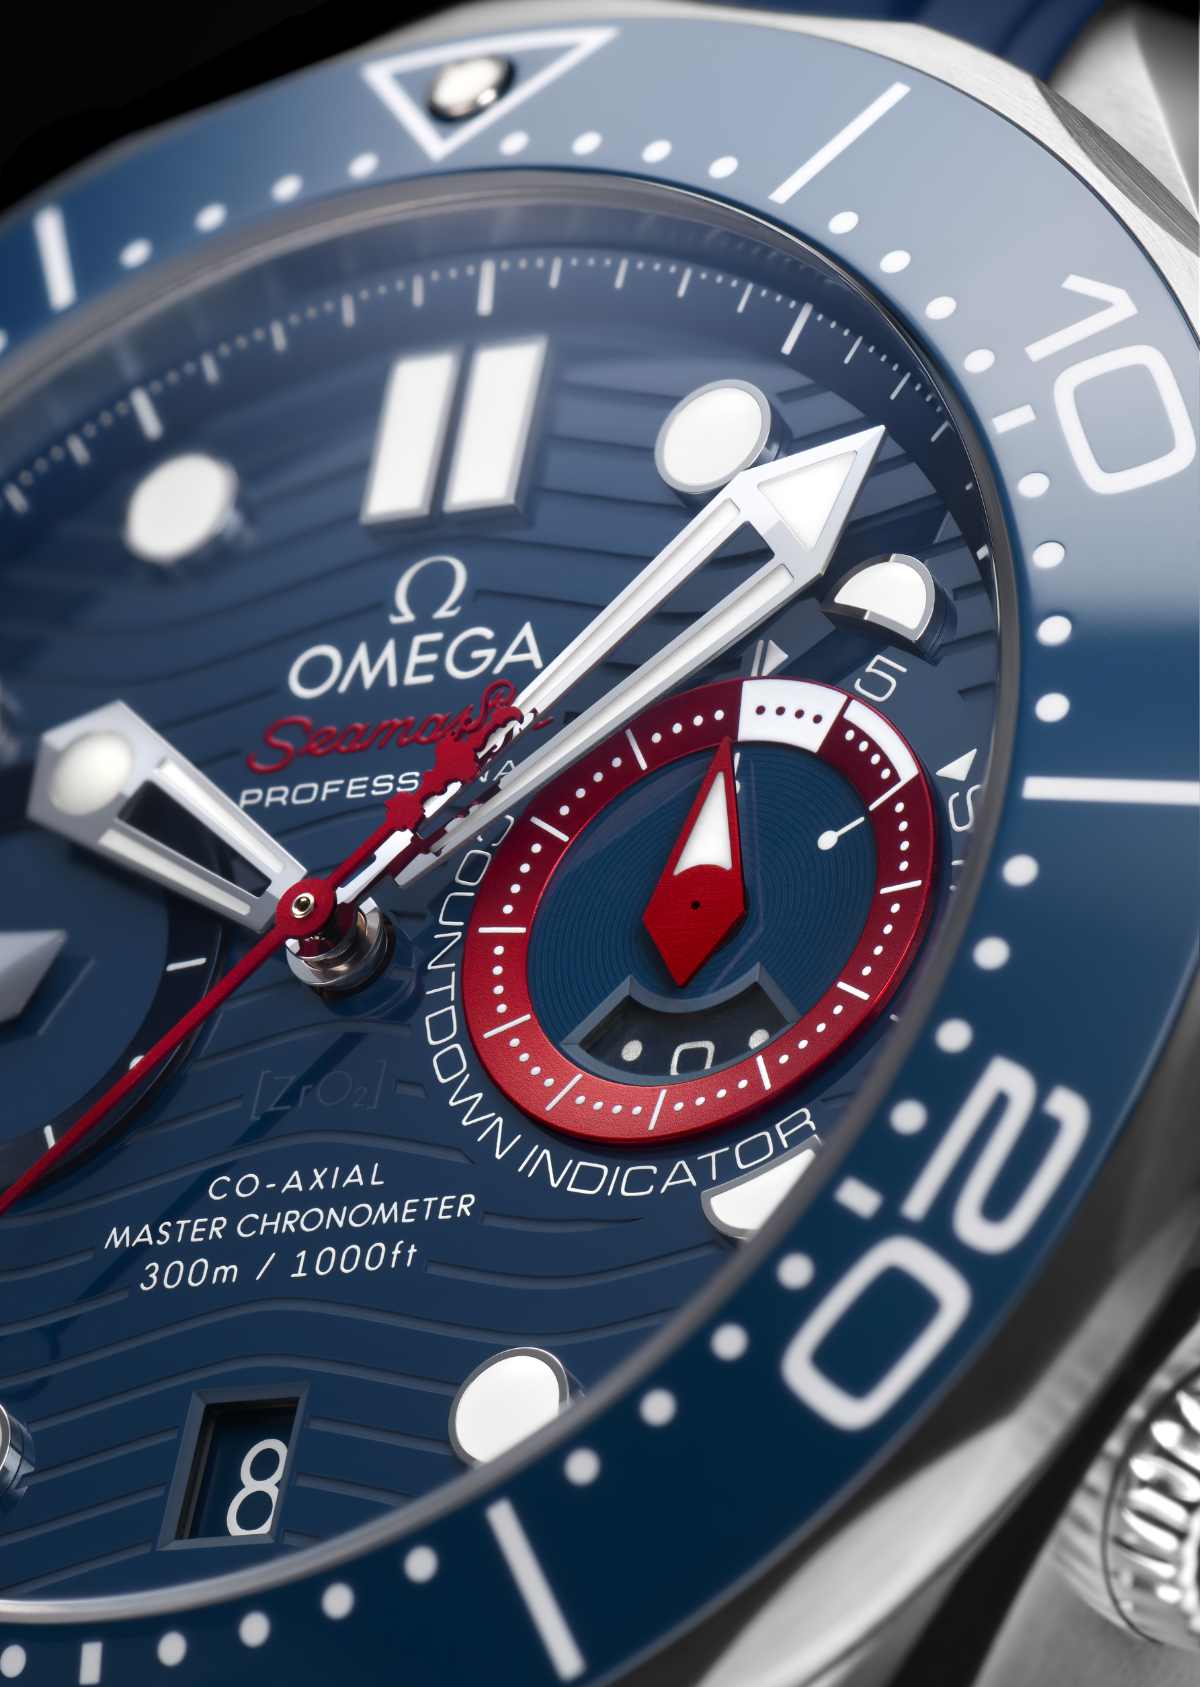 OMEGA's Chronograph for America's Cup